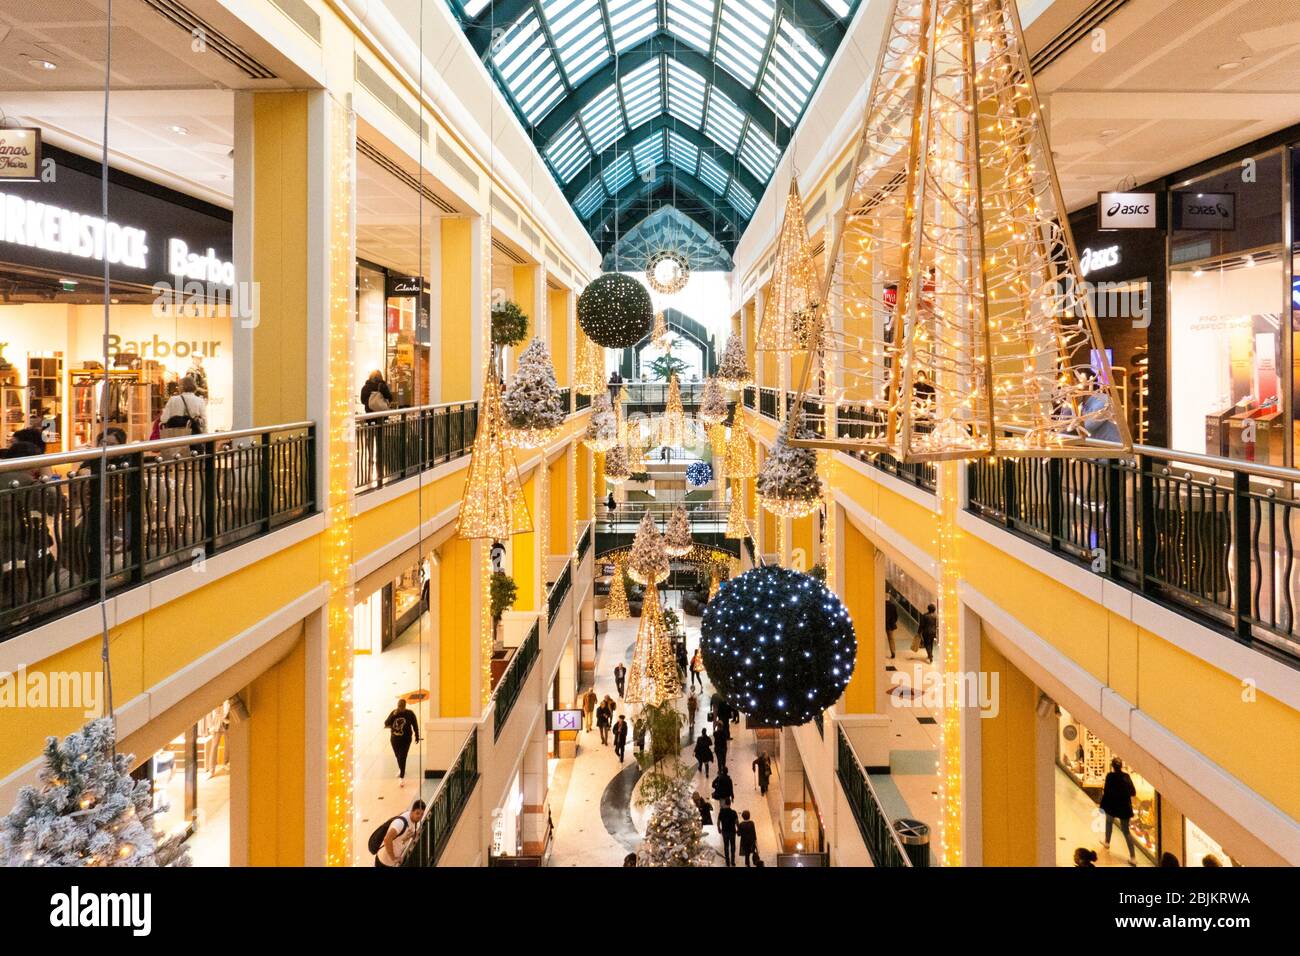 Colombo shopping mall in Lisbon, Portugal Stock Photo - Alamy